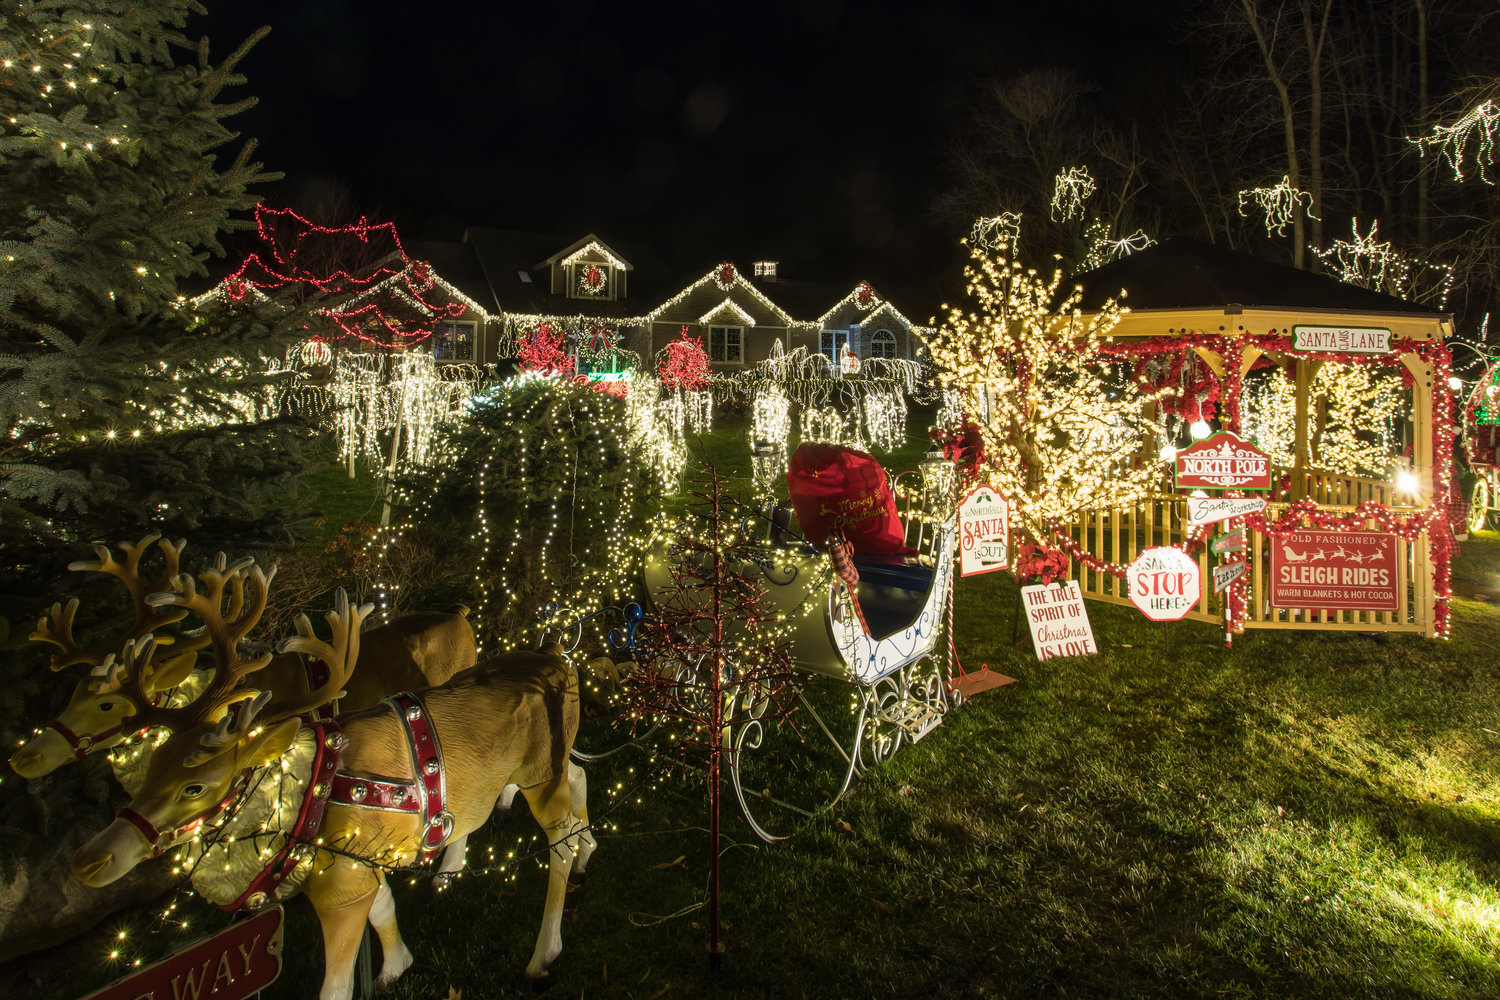 Visible from space?  Cheryl Underwood smiles as she admits her epic Christmas display is “a little over the top”.  It includes more than 150,000 lights and draws hundreds of visitors to Williamstown Township.